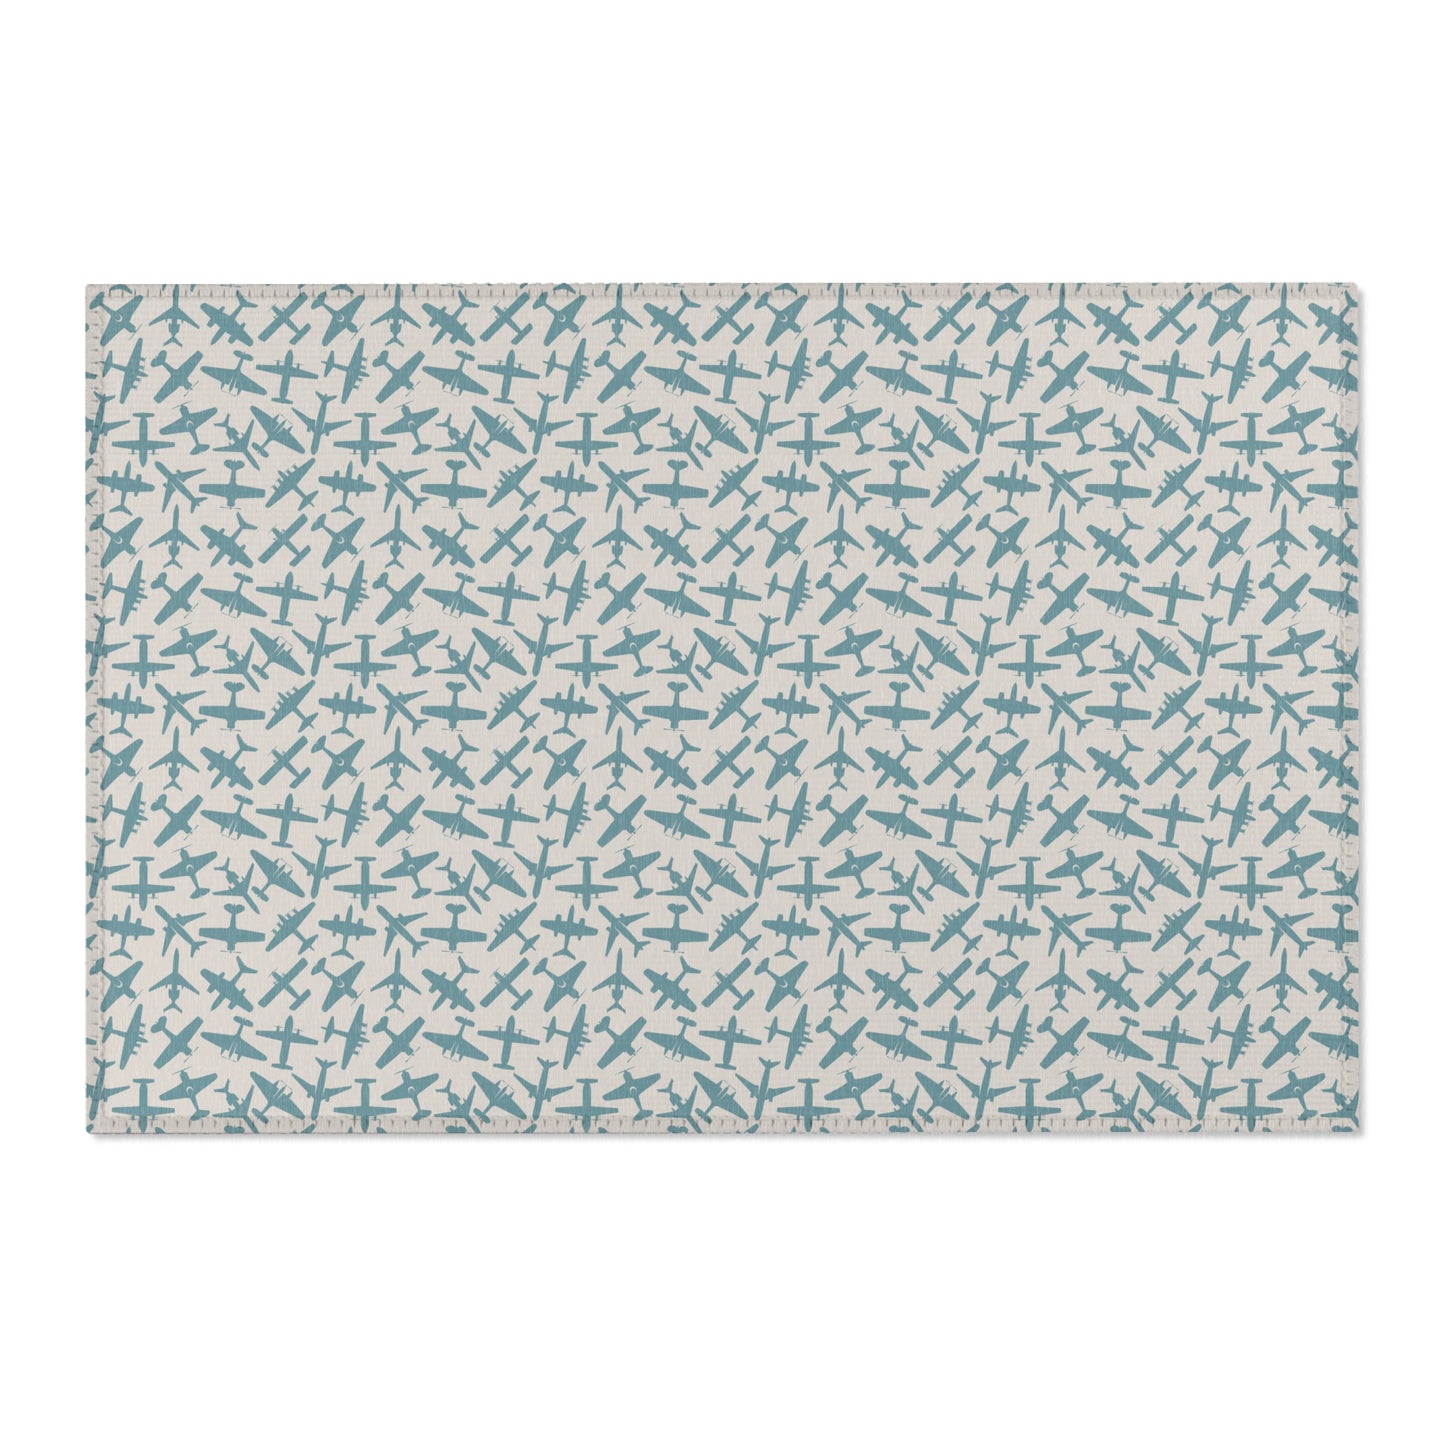 aviation merchandise, airplane patterned aviation area rug 3